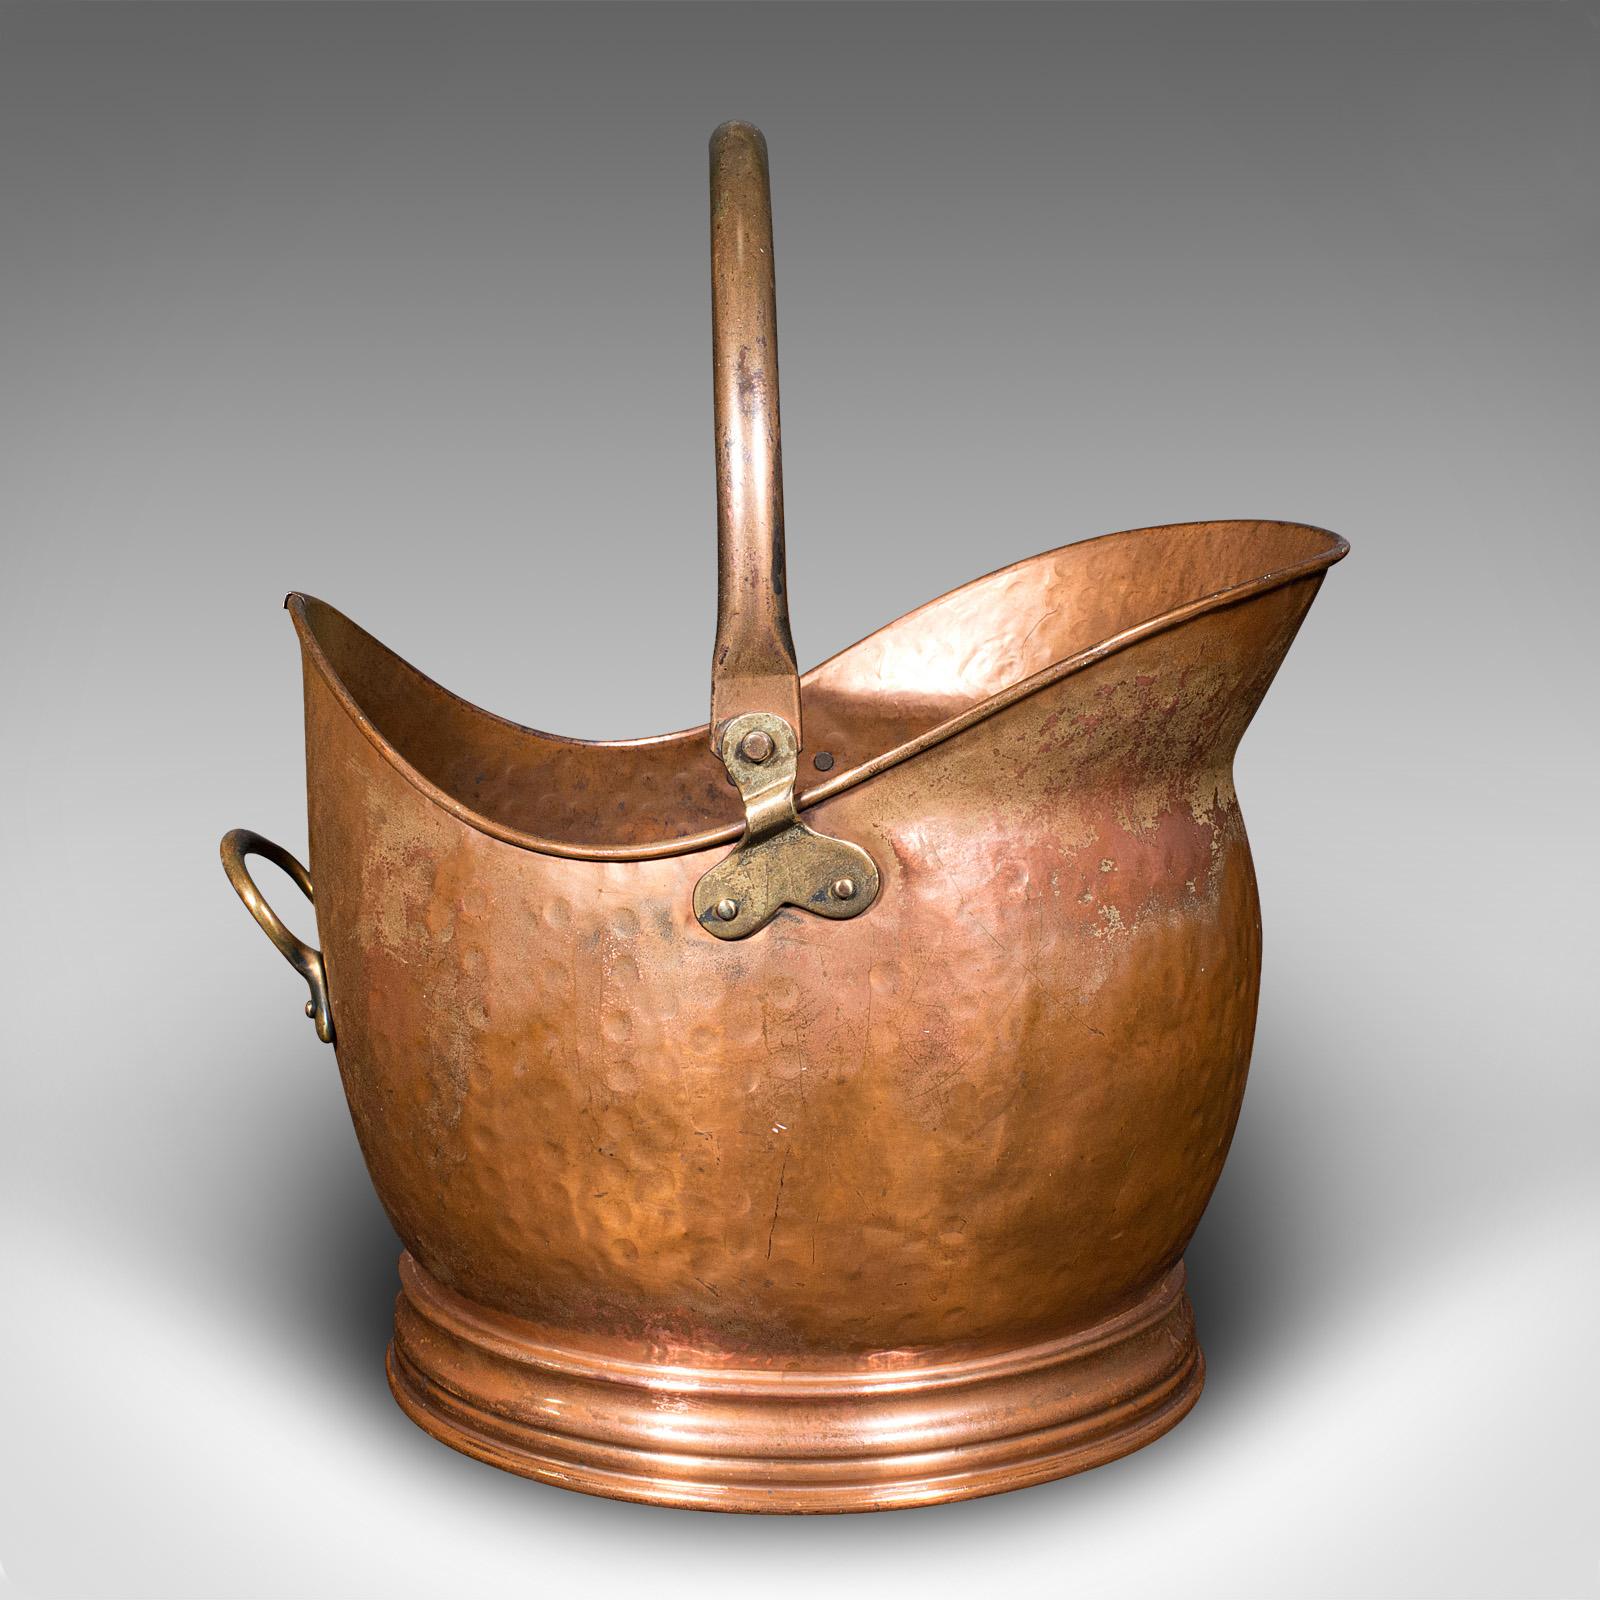 This is an antique helmet coal scuttle. An English, copper fireside store or fuel keeper, dating to the late Victorian period, circa 1900.

Delightfully traditional scuttle with great hand-beaten finish
Displays a desirable aged patina and in